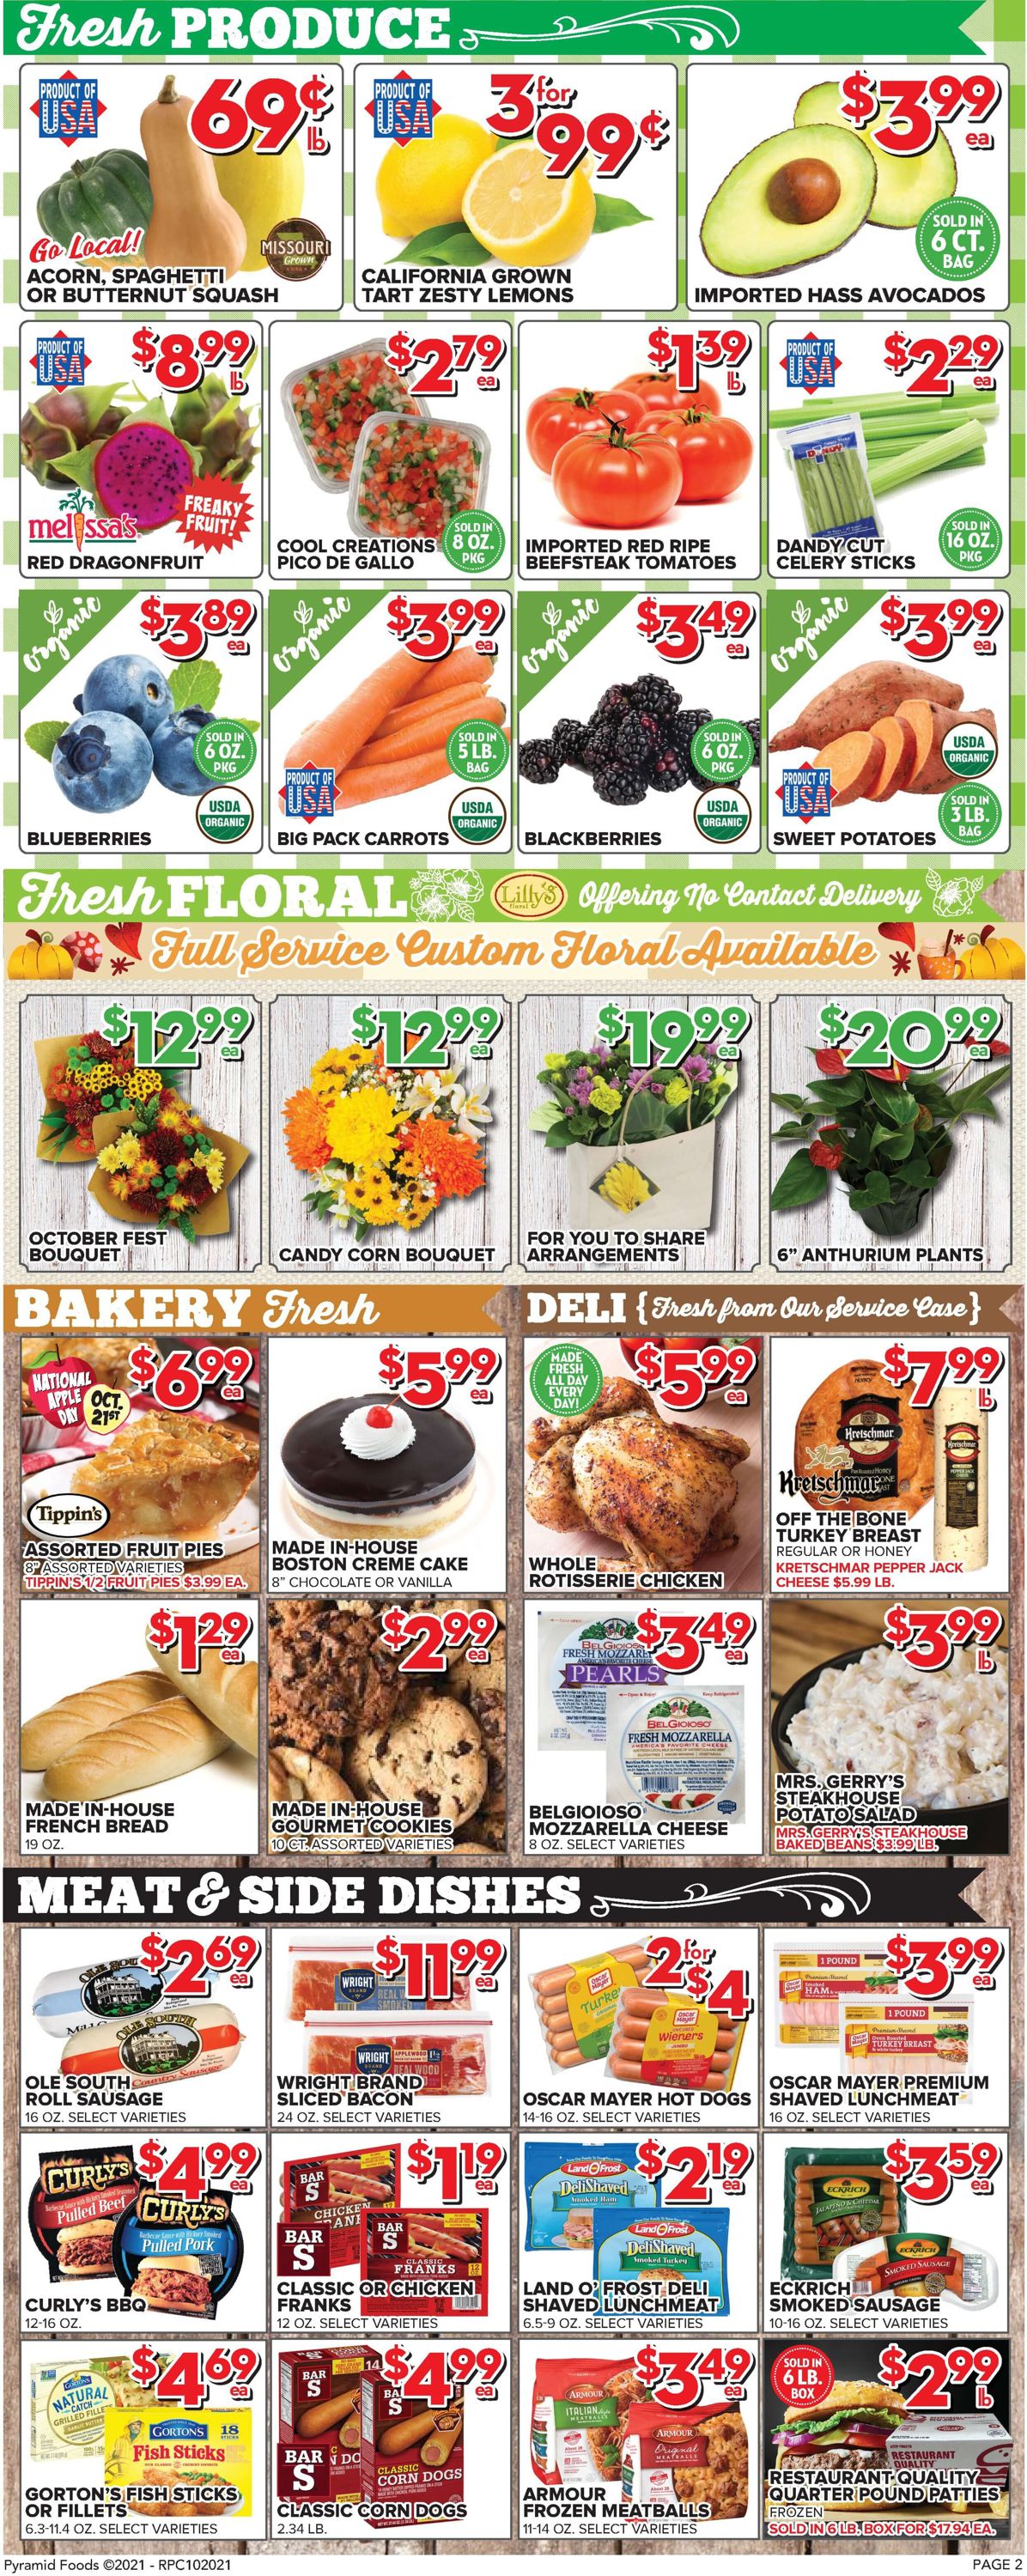 Price Cutter Weekly Ad Circular - valid 10/20-10/26/2021 (Page 2)